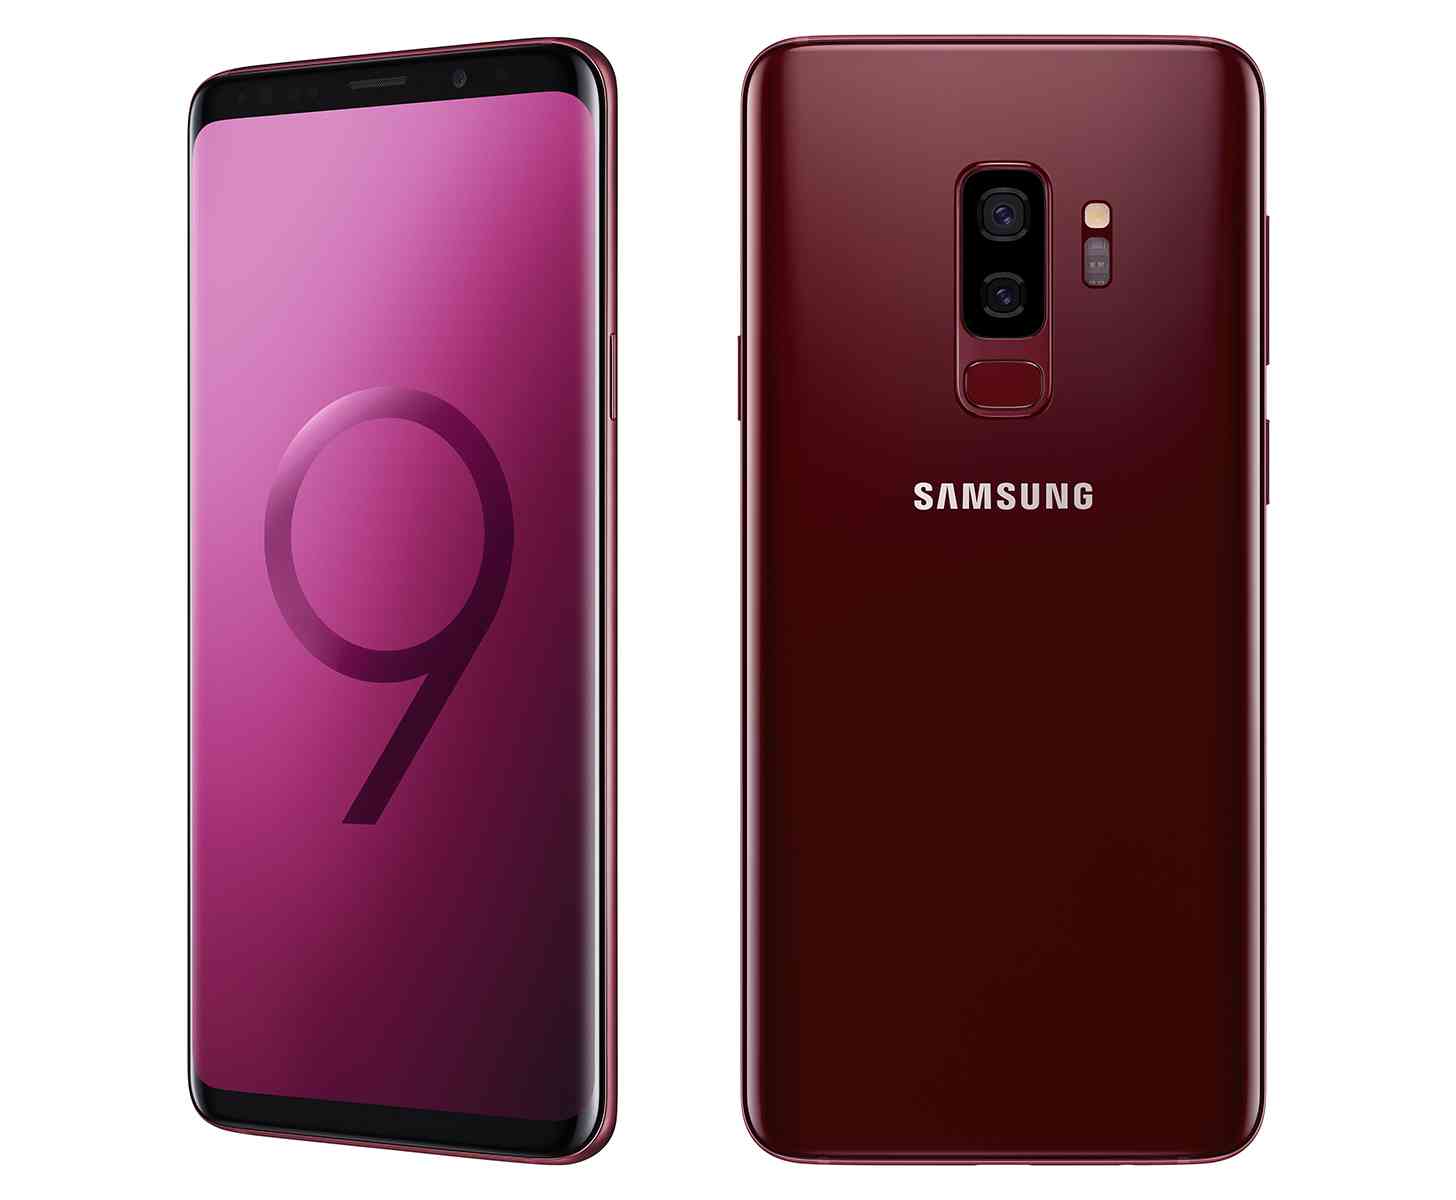 Samsung Galaxy S9 Plus Burgundy Red official images